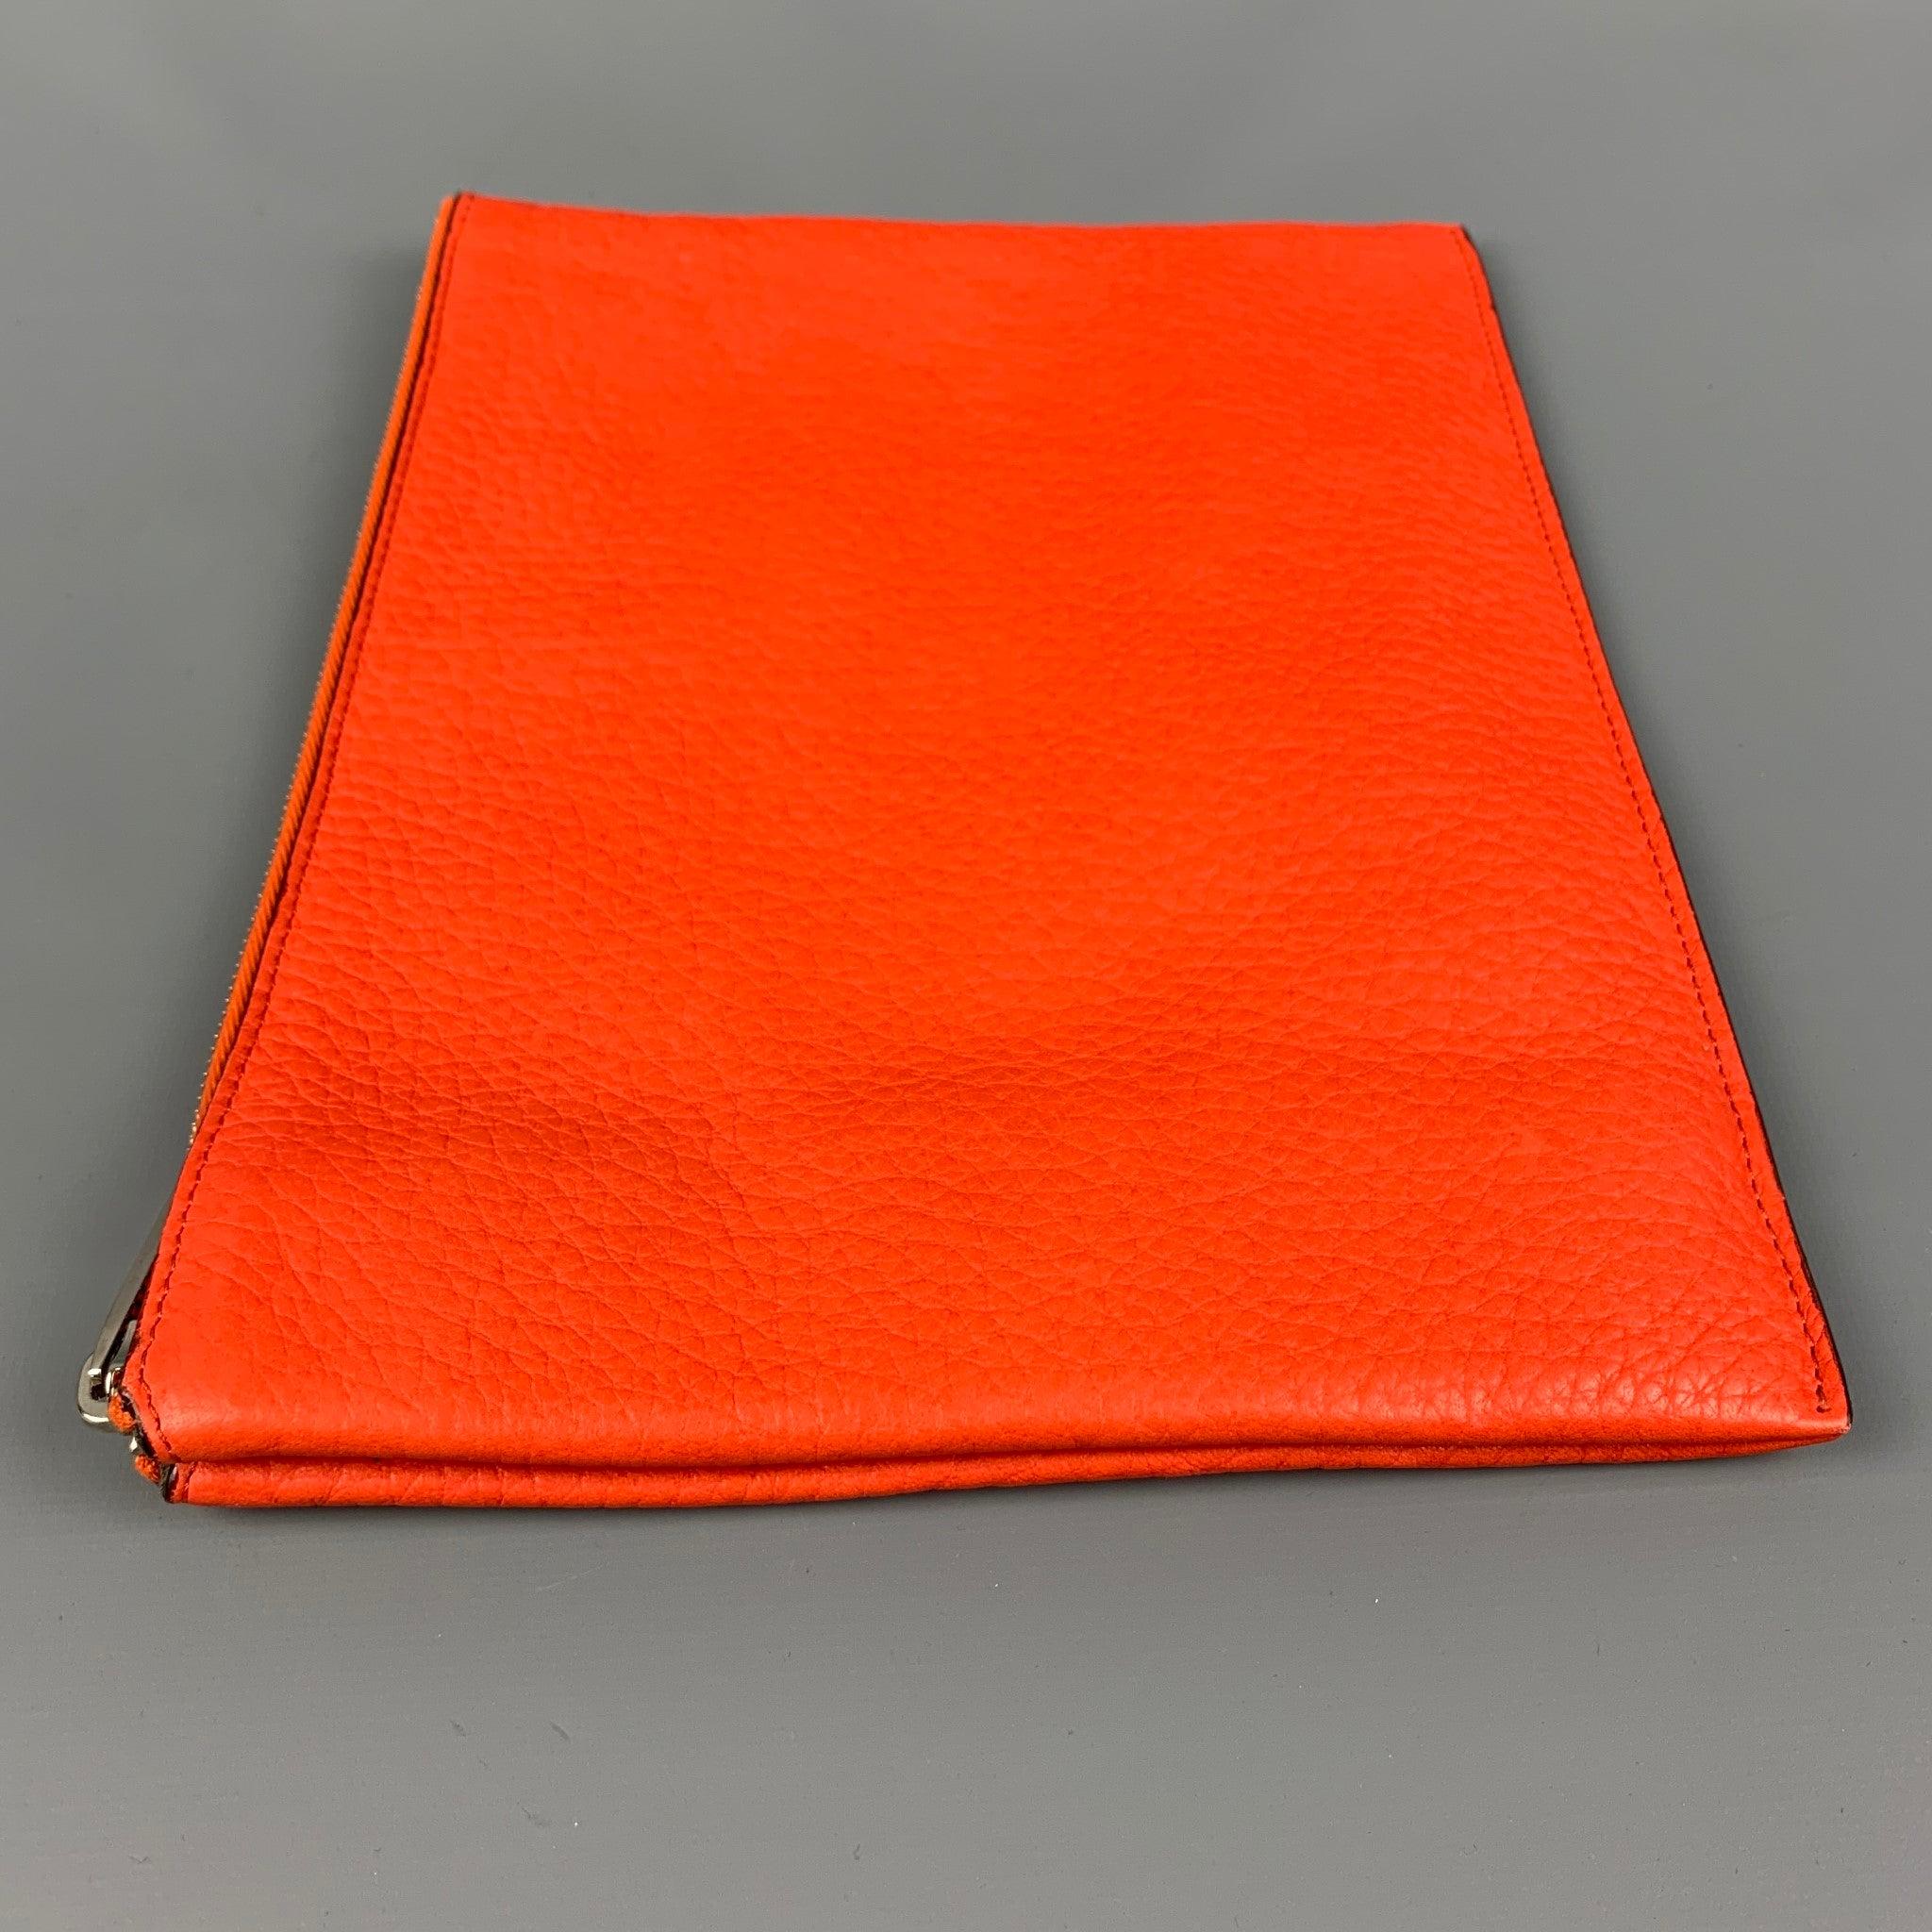 Men's CALVIN KLEIN COLLECTION Orange Textured Leather Pouch Bag For Sale